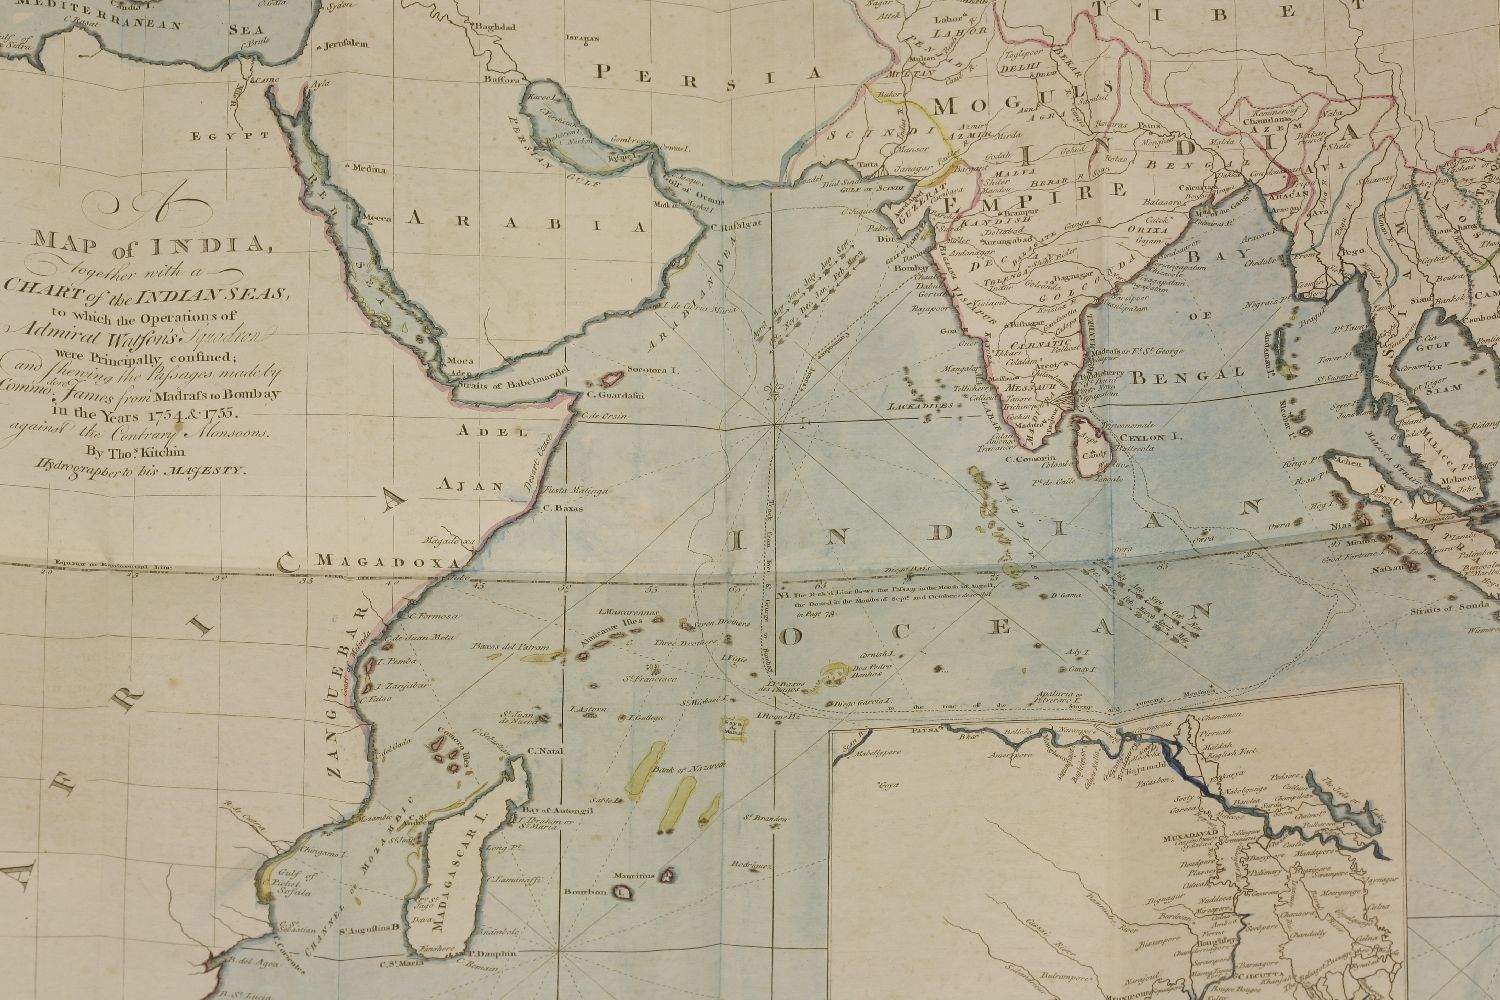 IVES (Edward): A Voyage from England to India, in the Year MDCCLIV, and an Historical Narrative of - Image 4 of 4